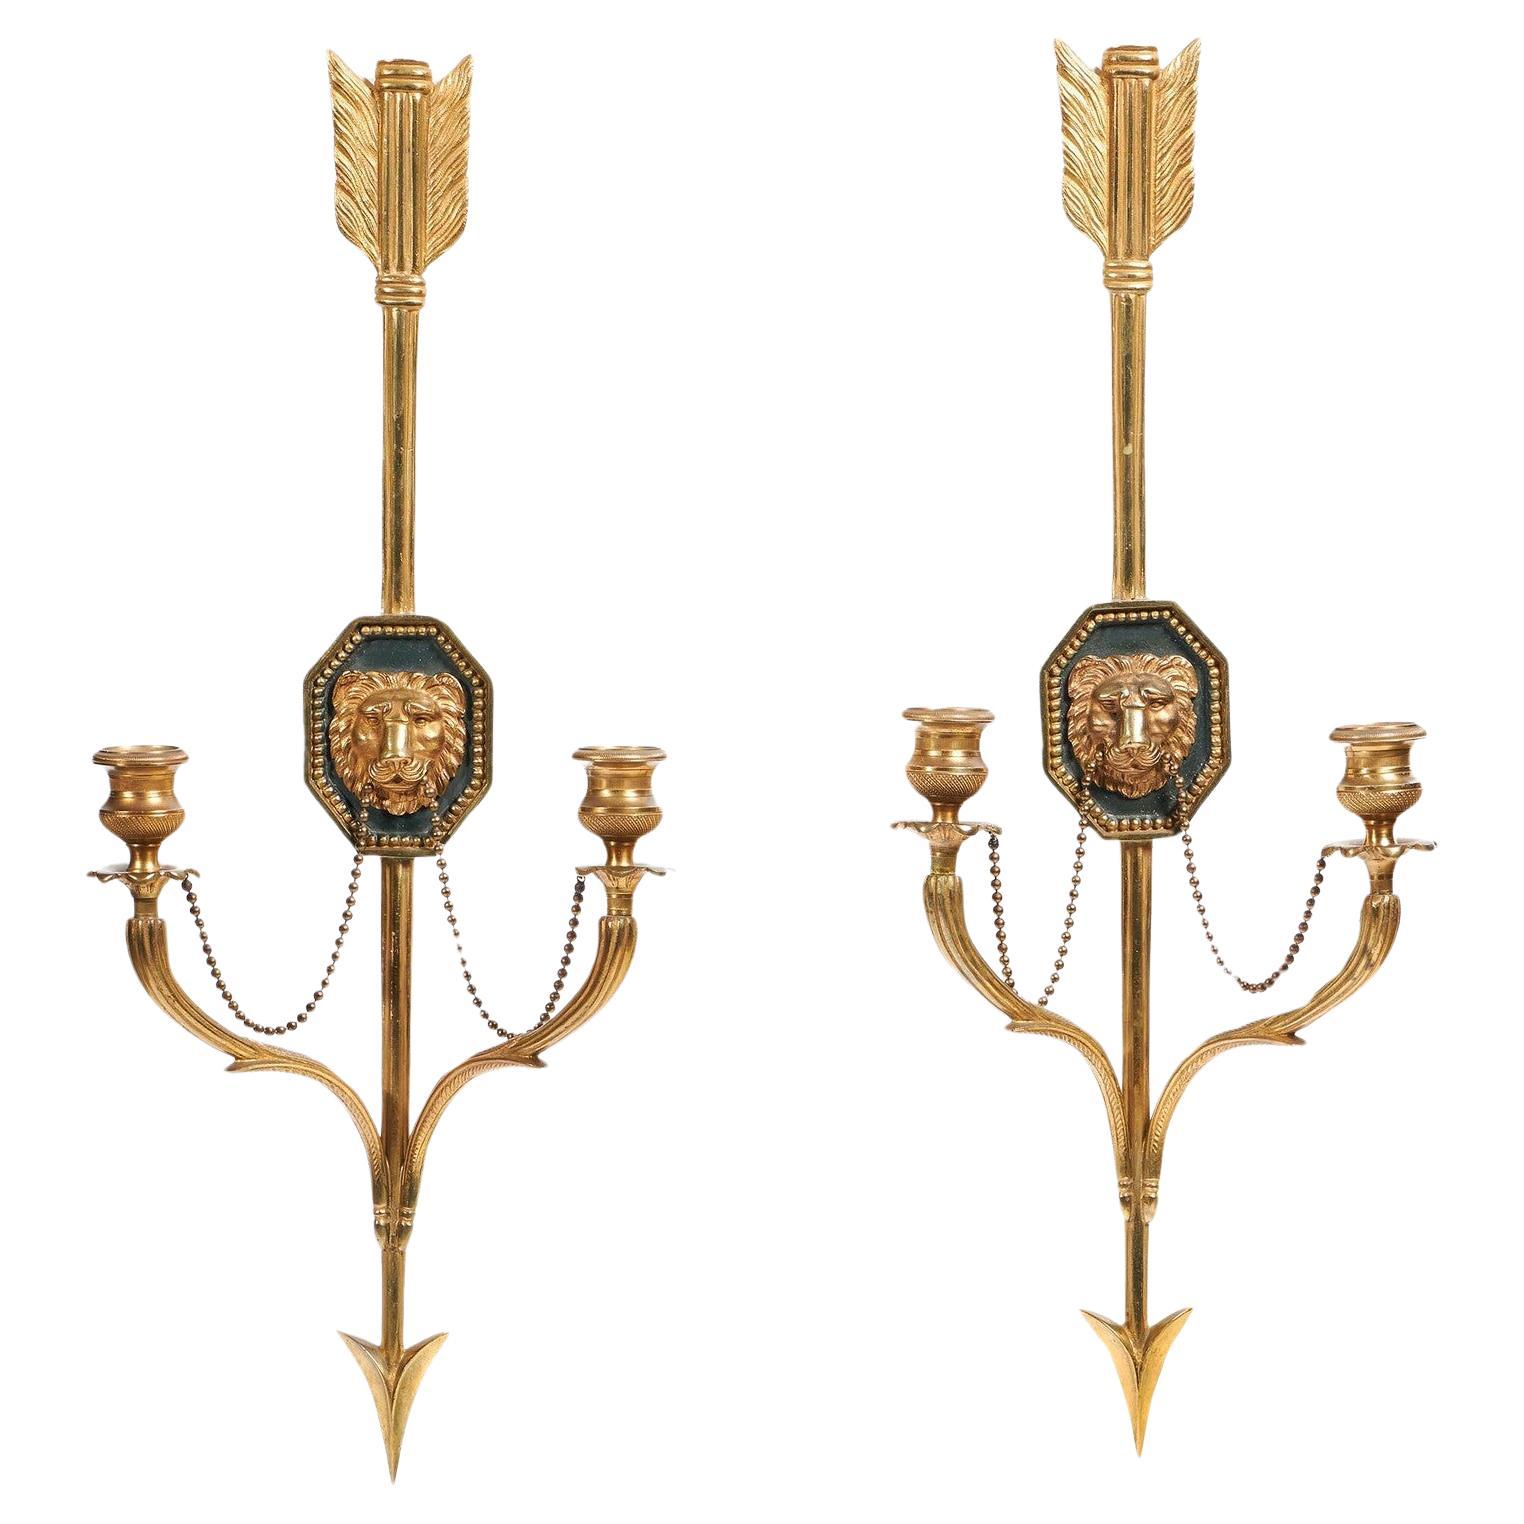 Fine Pair of Italian Ormolu Wall Lights or Appliques in the French Empire Style